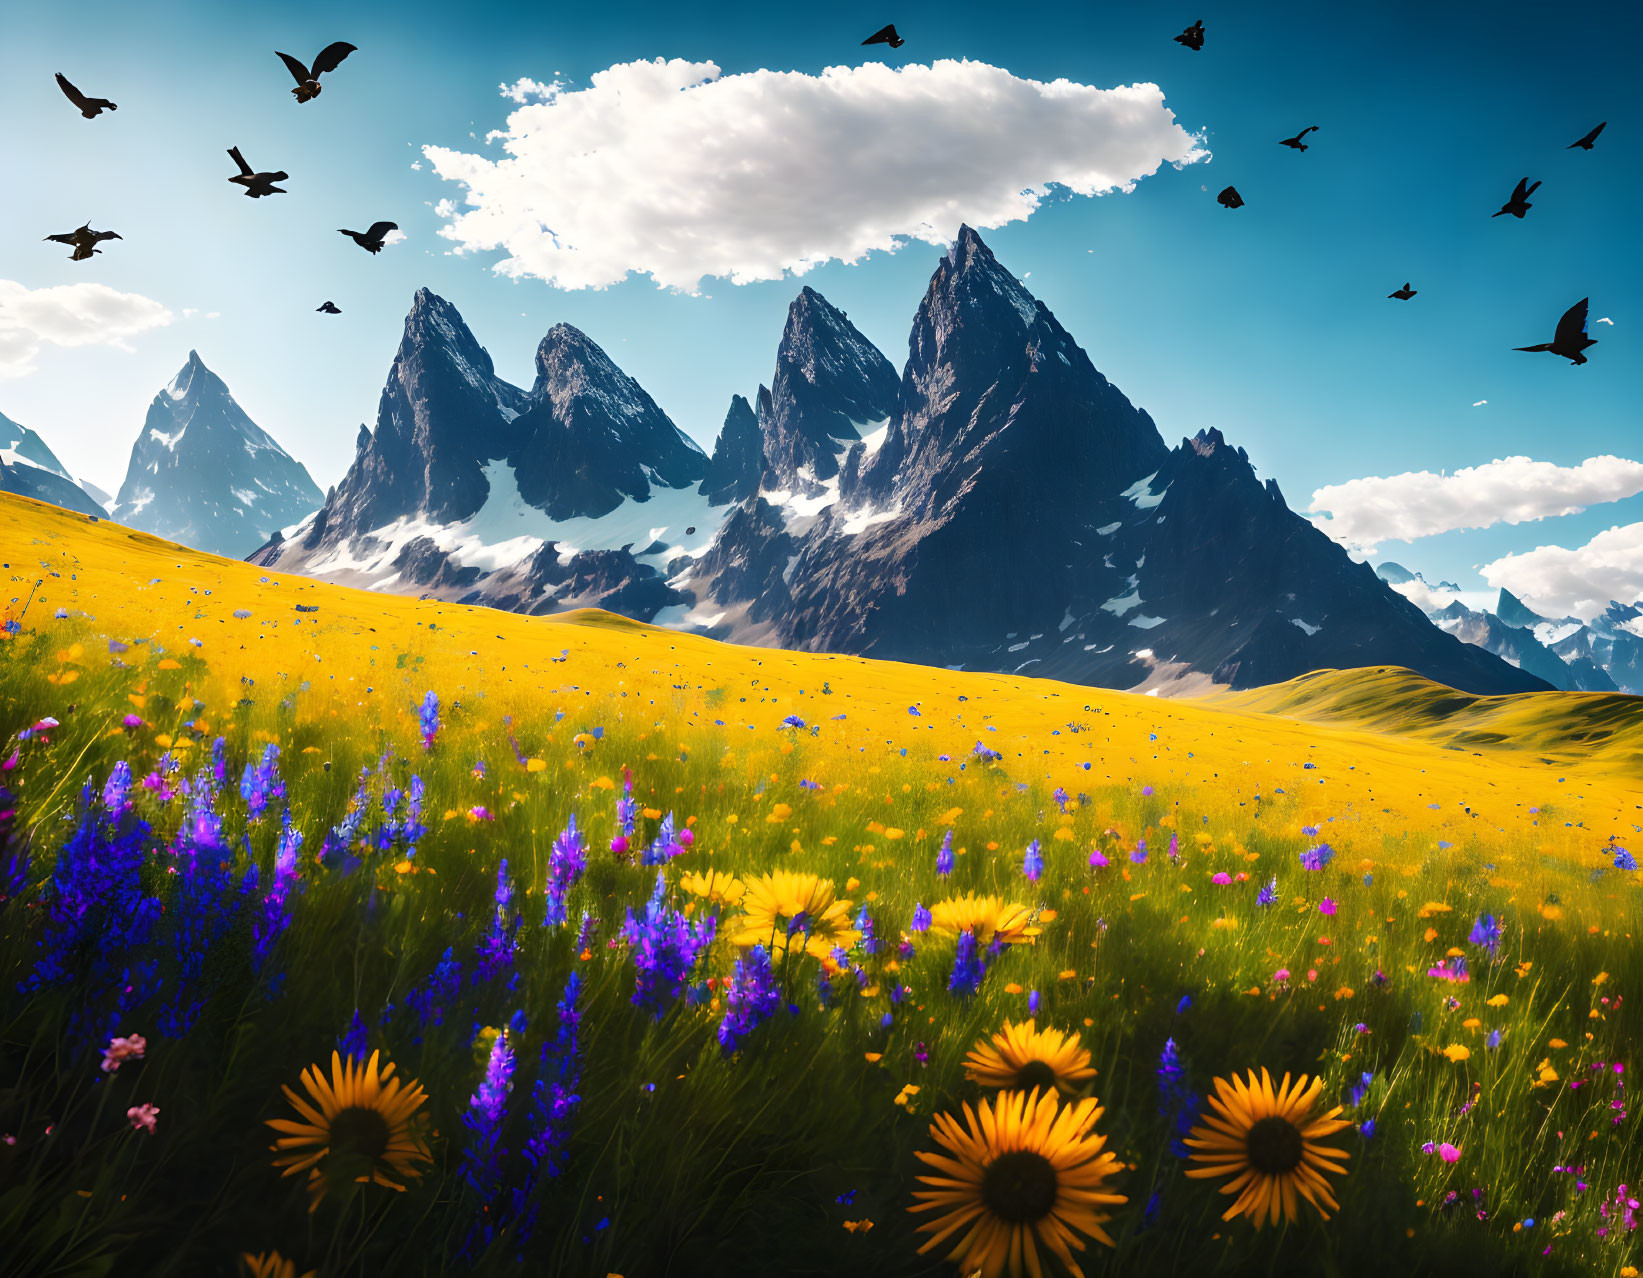 Majestic mountain peaks with wildflowers and blue sky